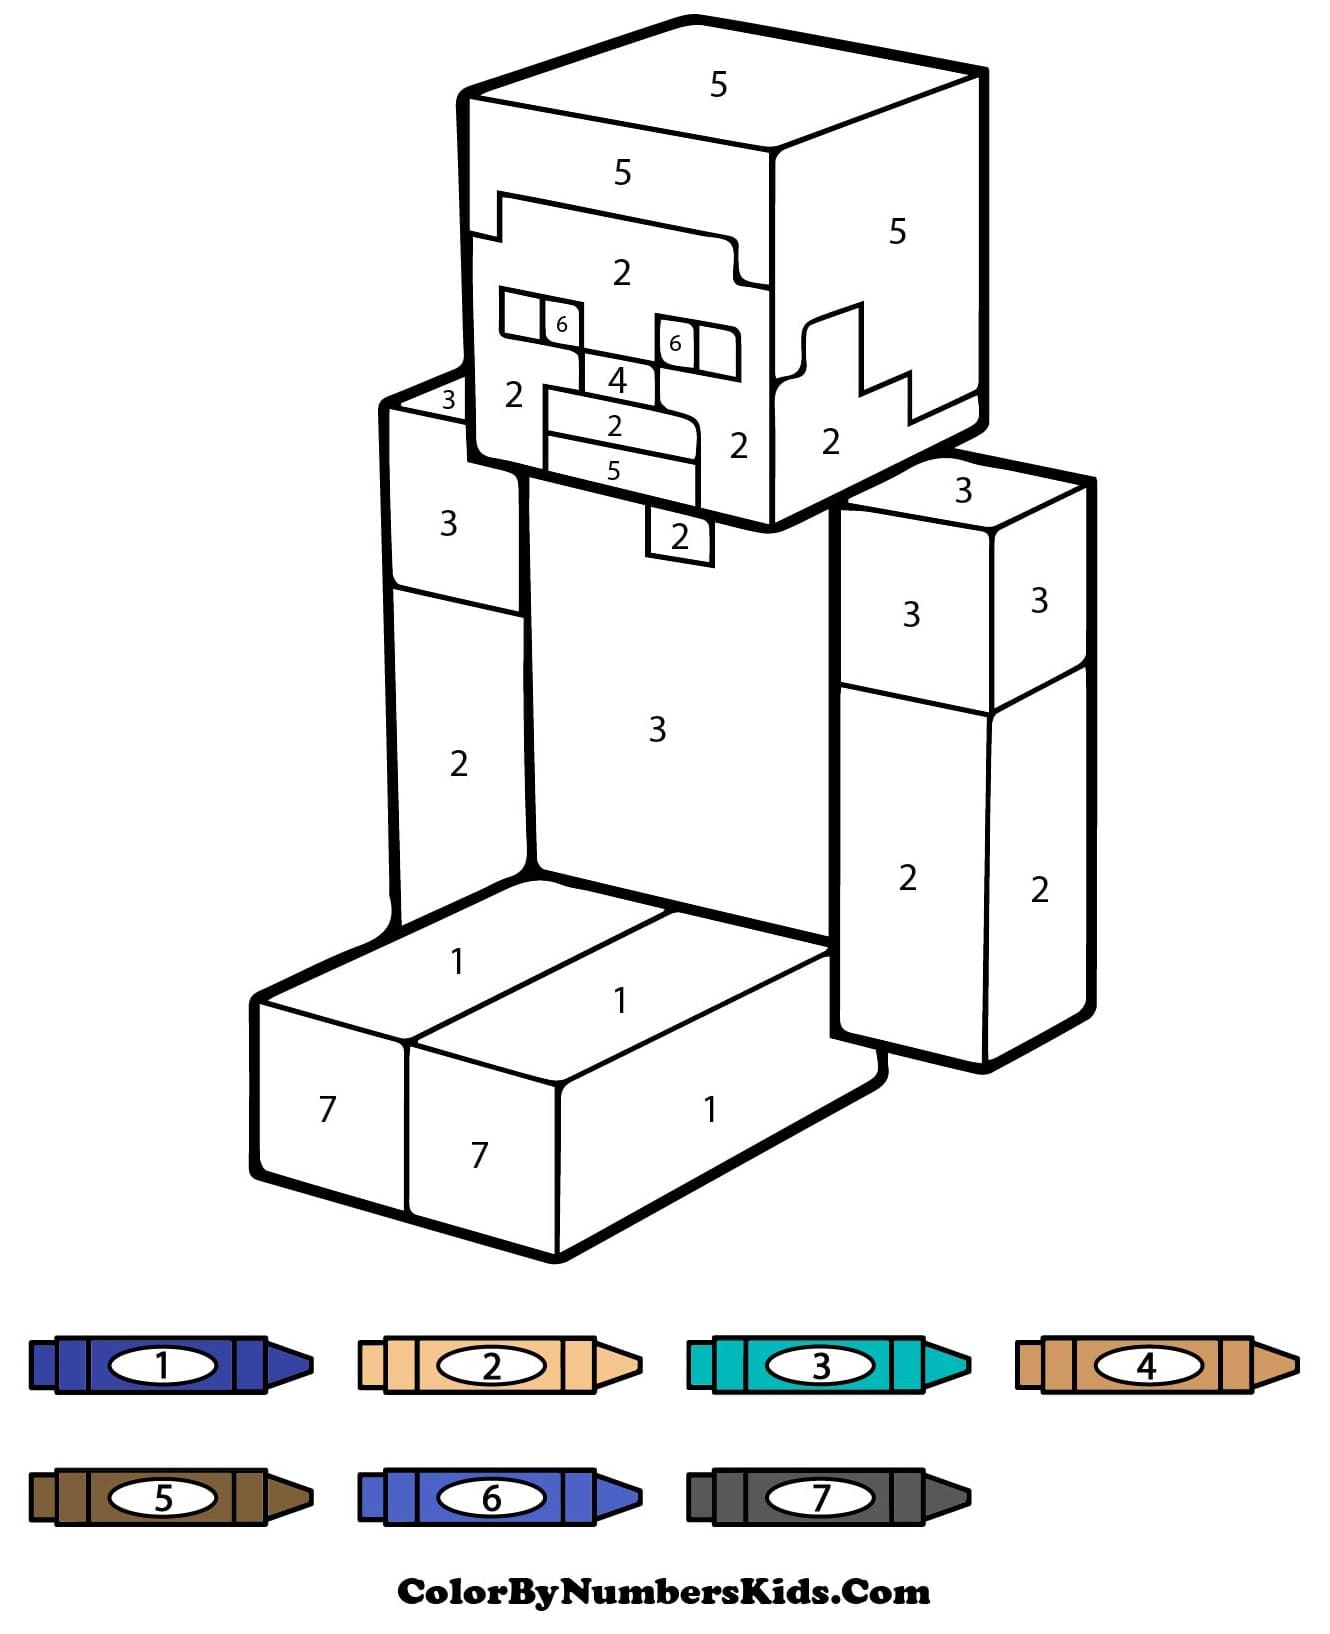 Steve in Minecraft Color By Number